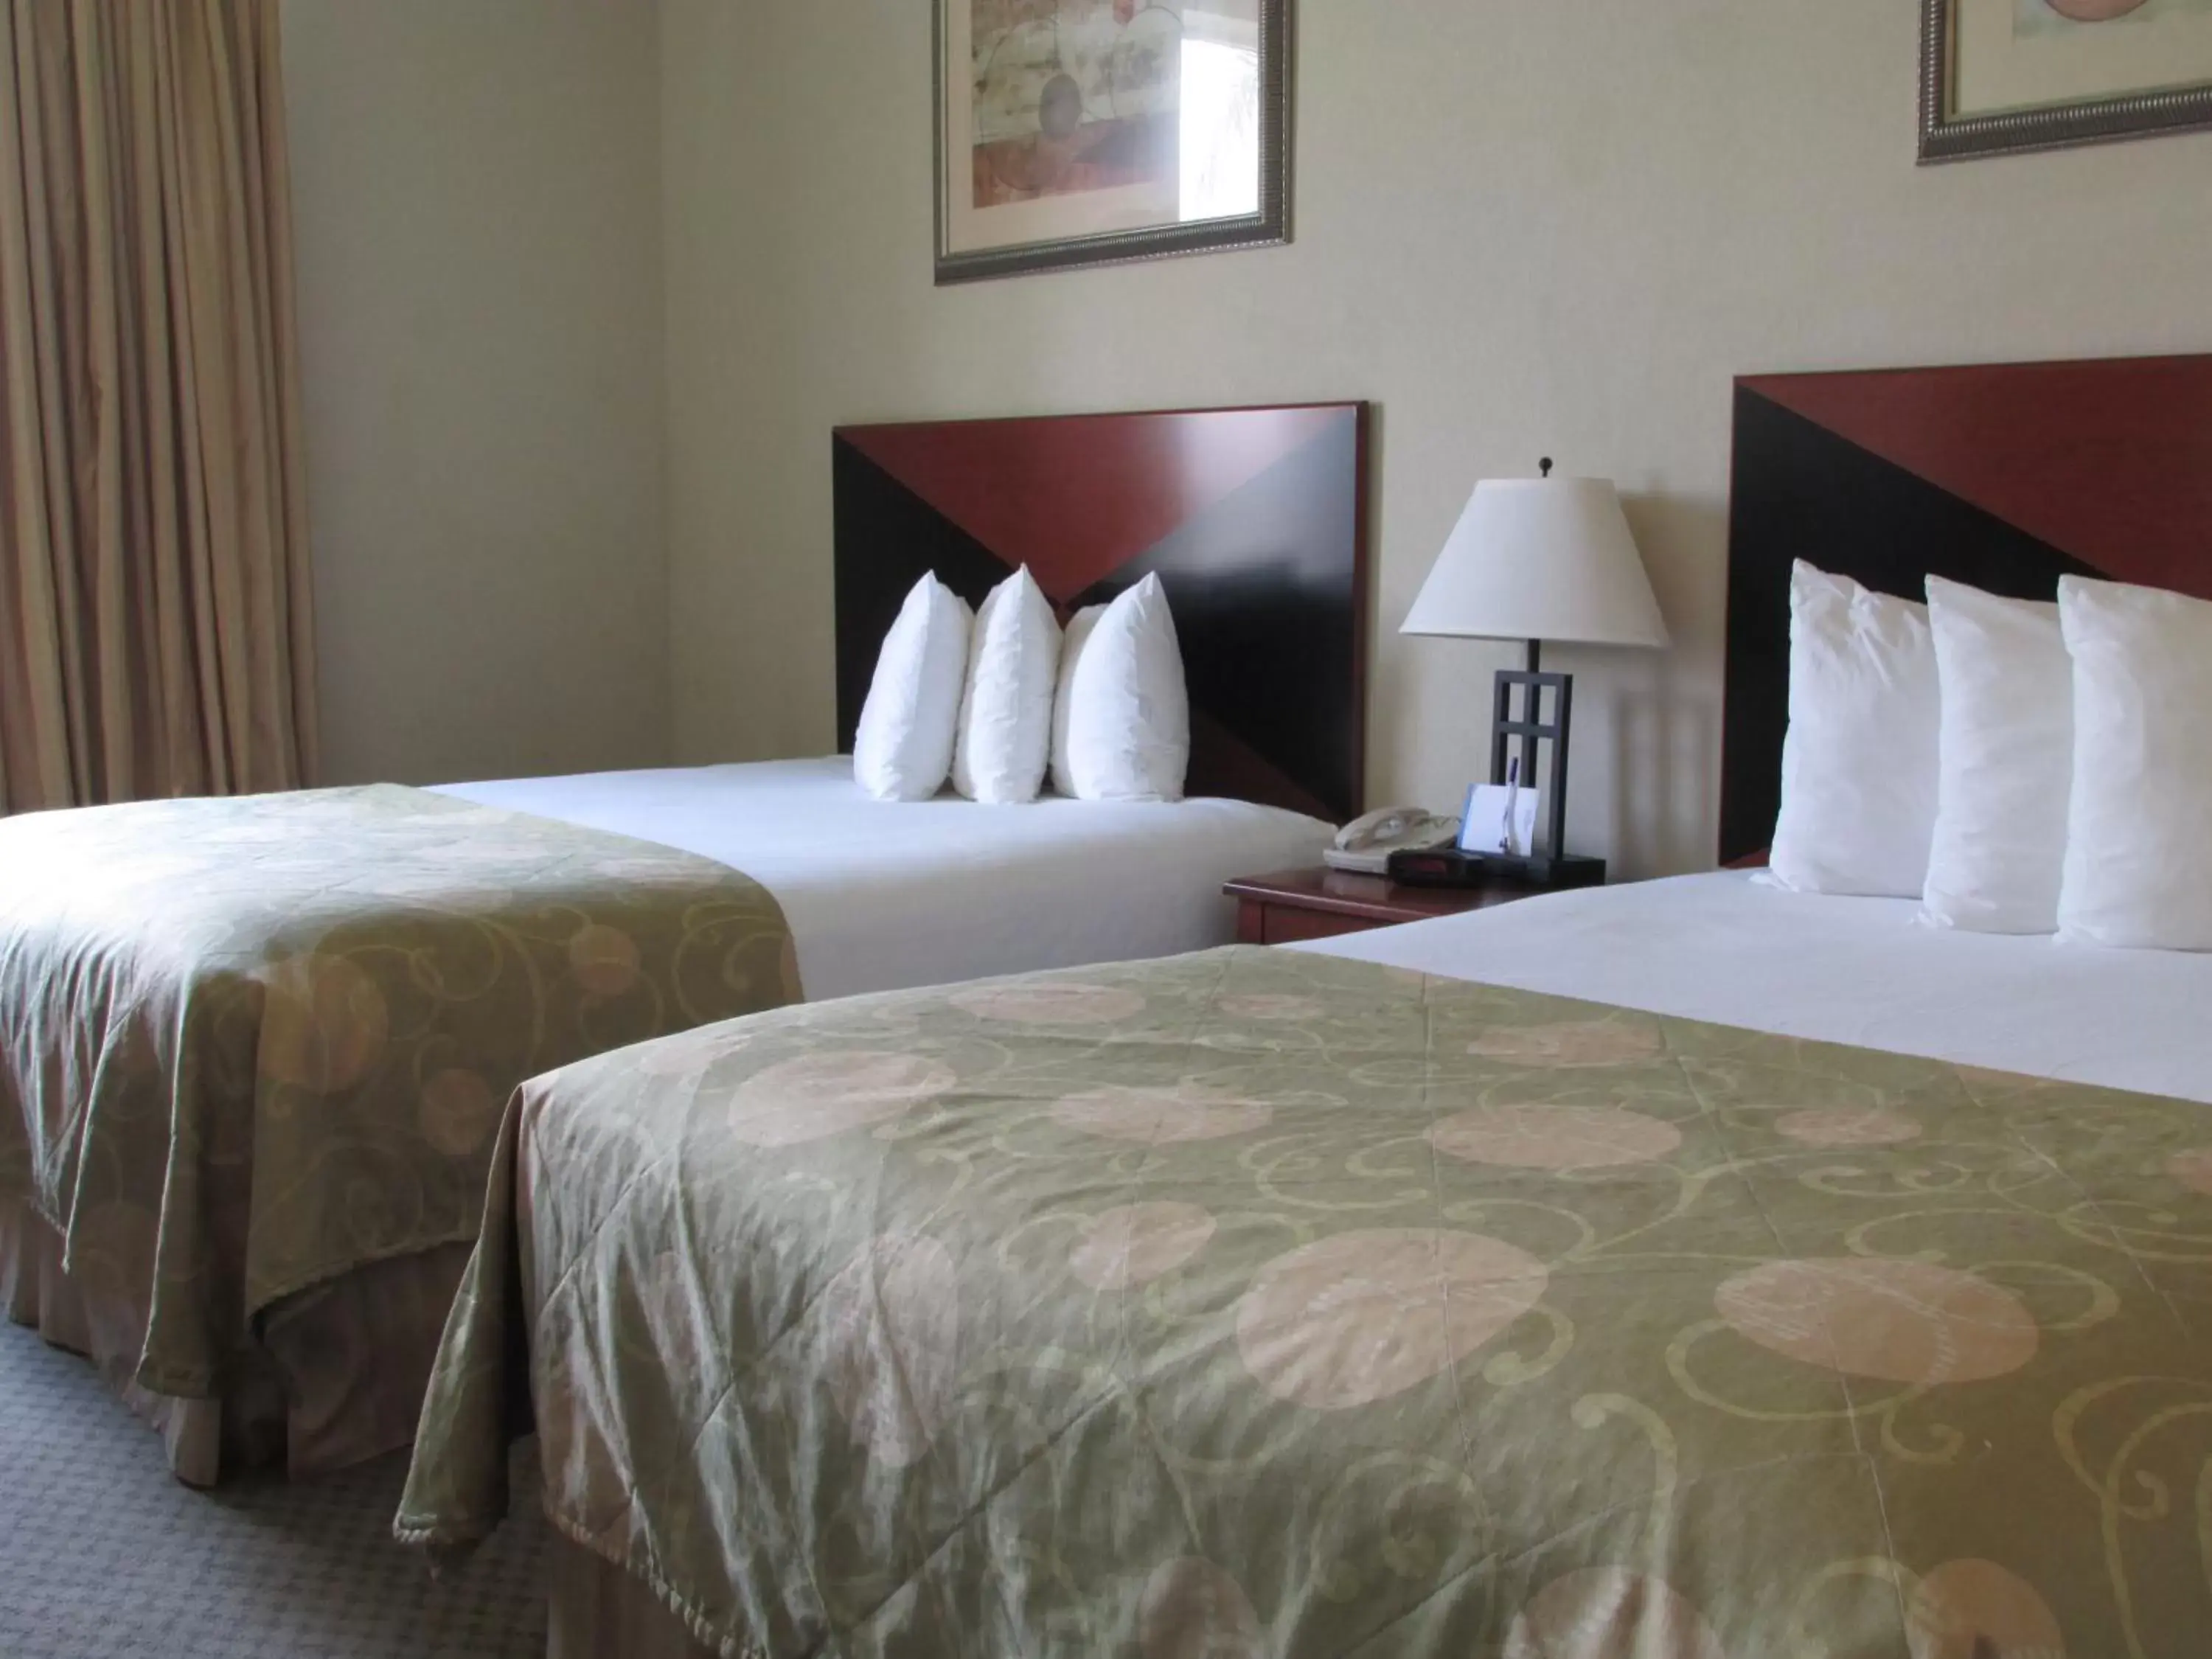 Bed, Room Photo in Baymont by Wyndham Marrero